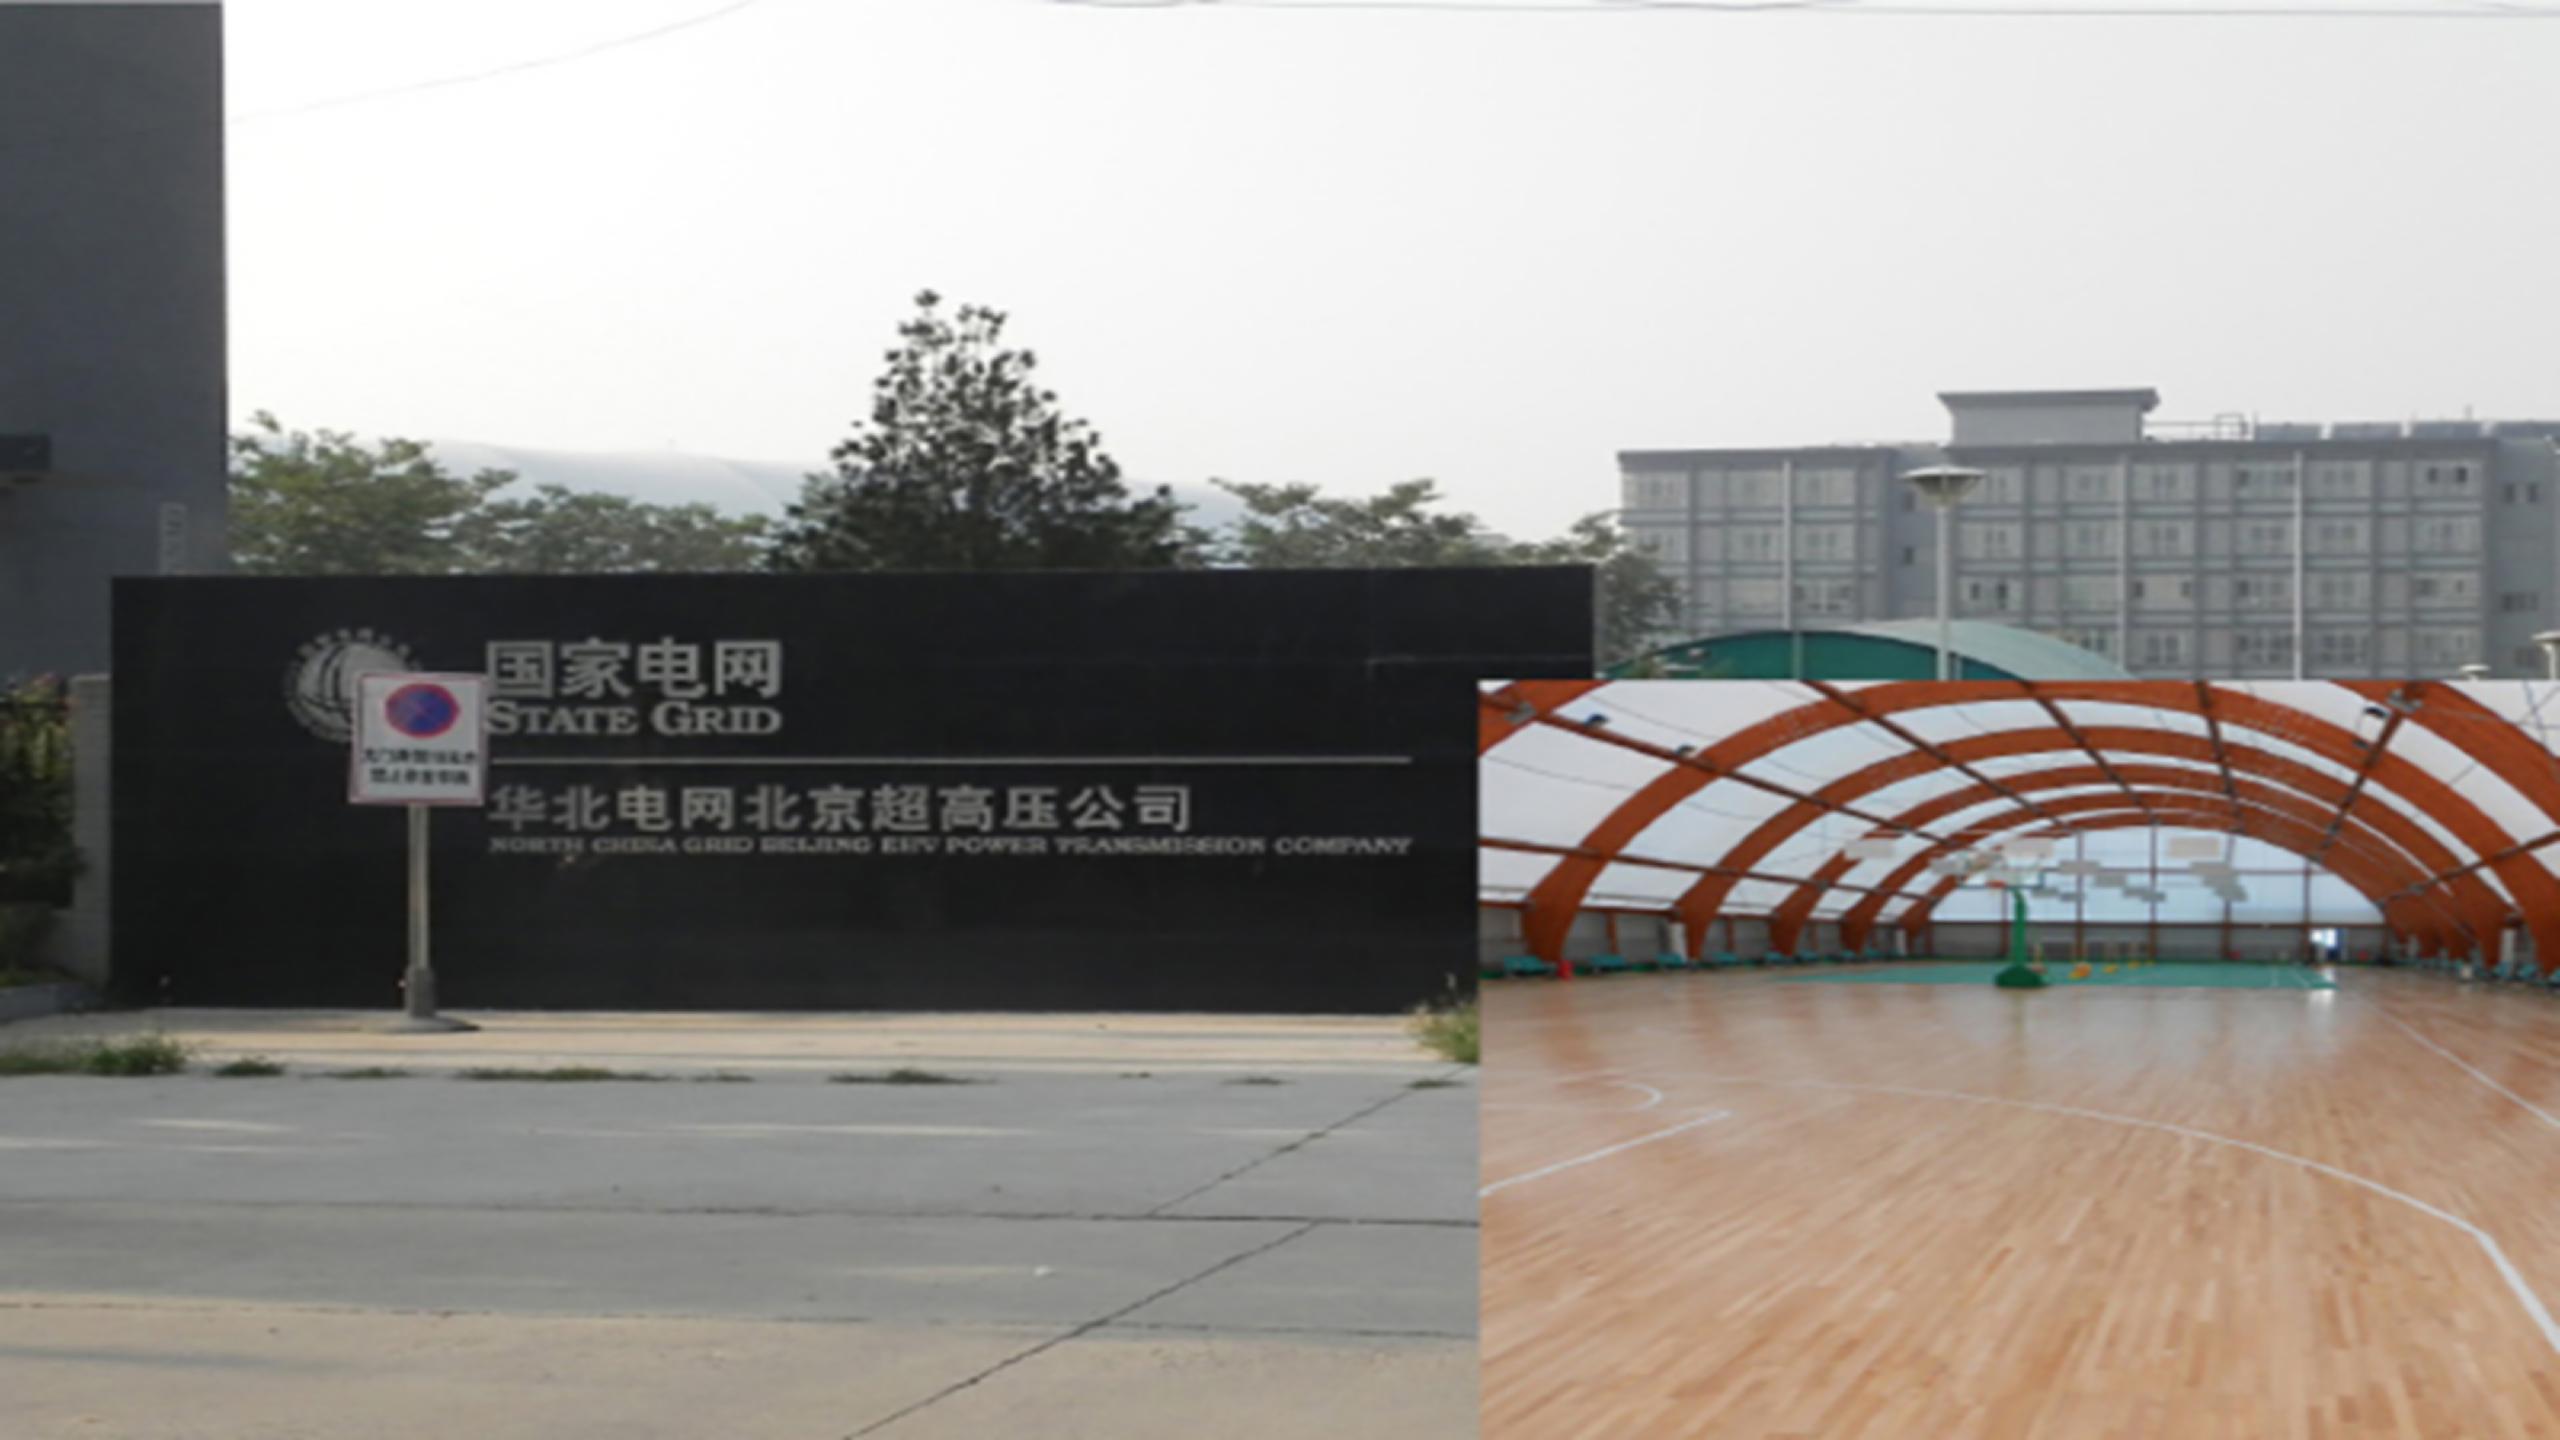 Liangxiang ultra-high voltage power grid company